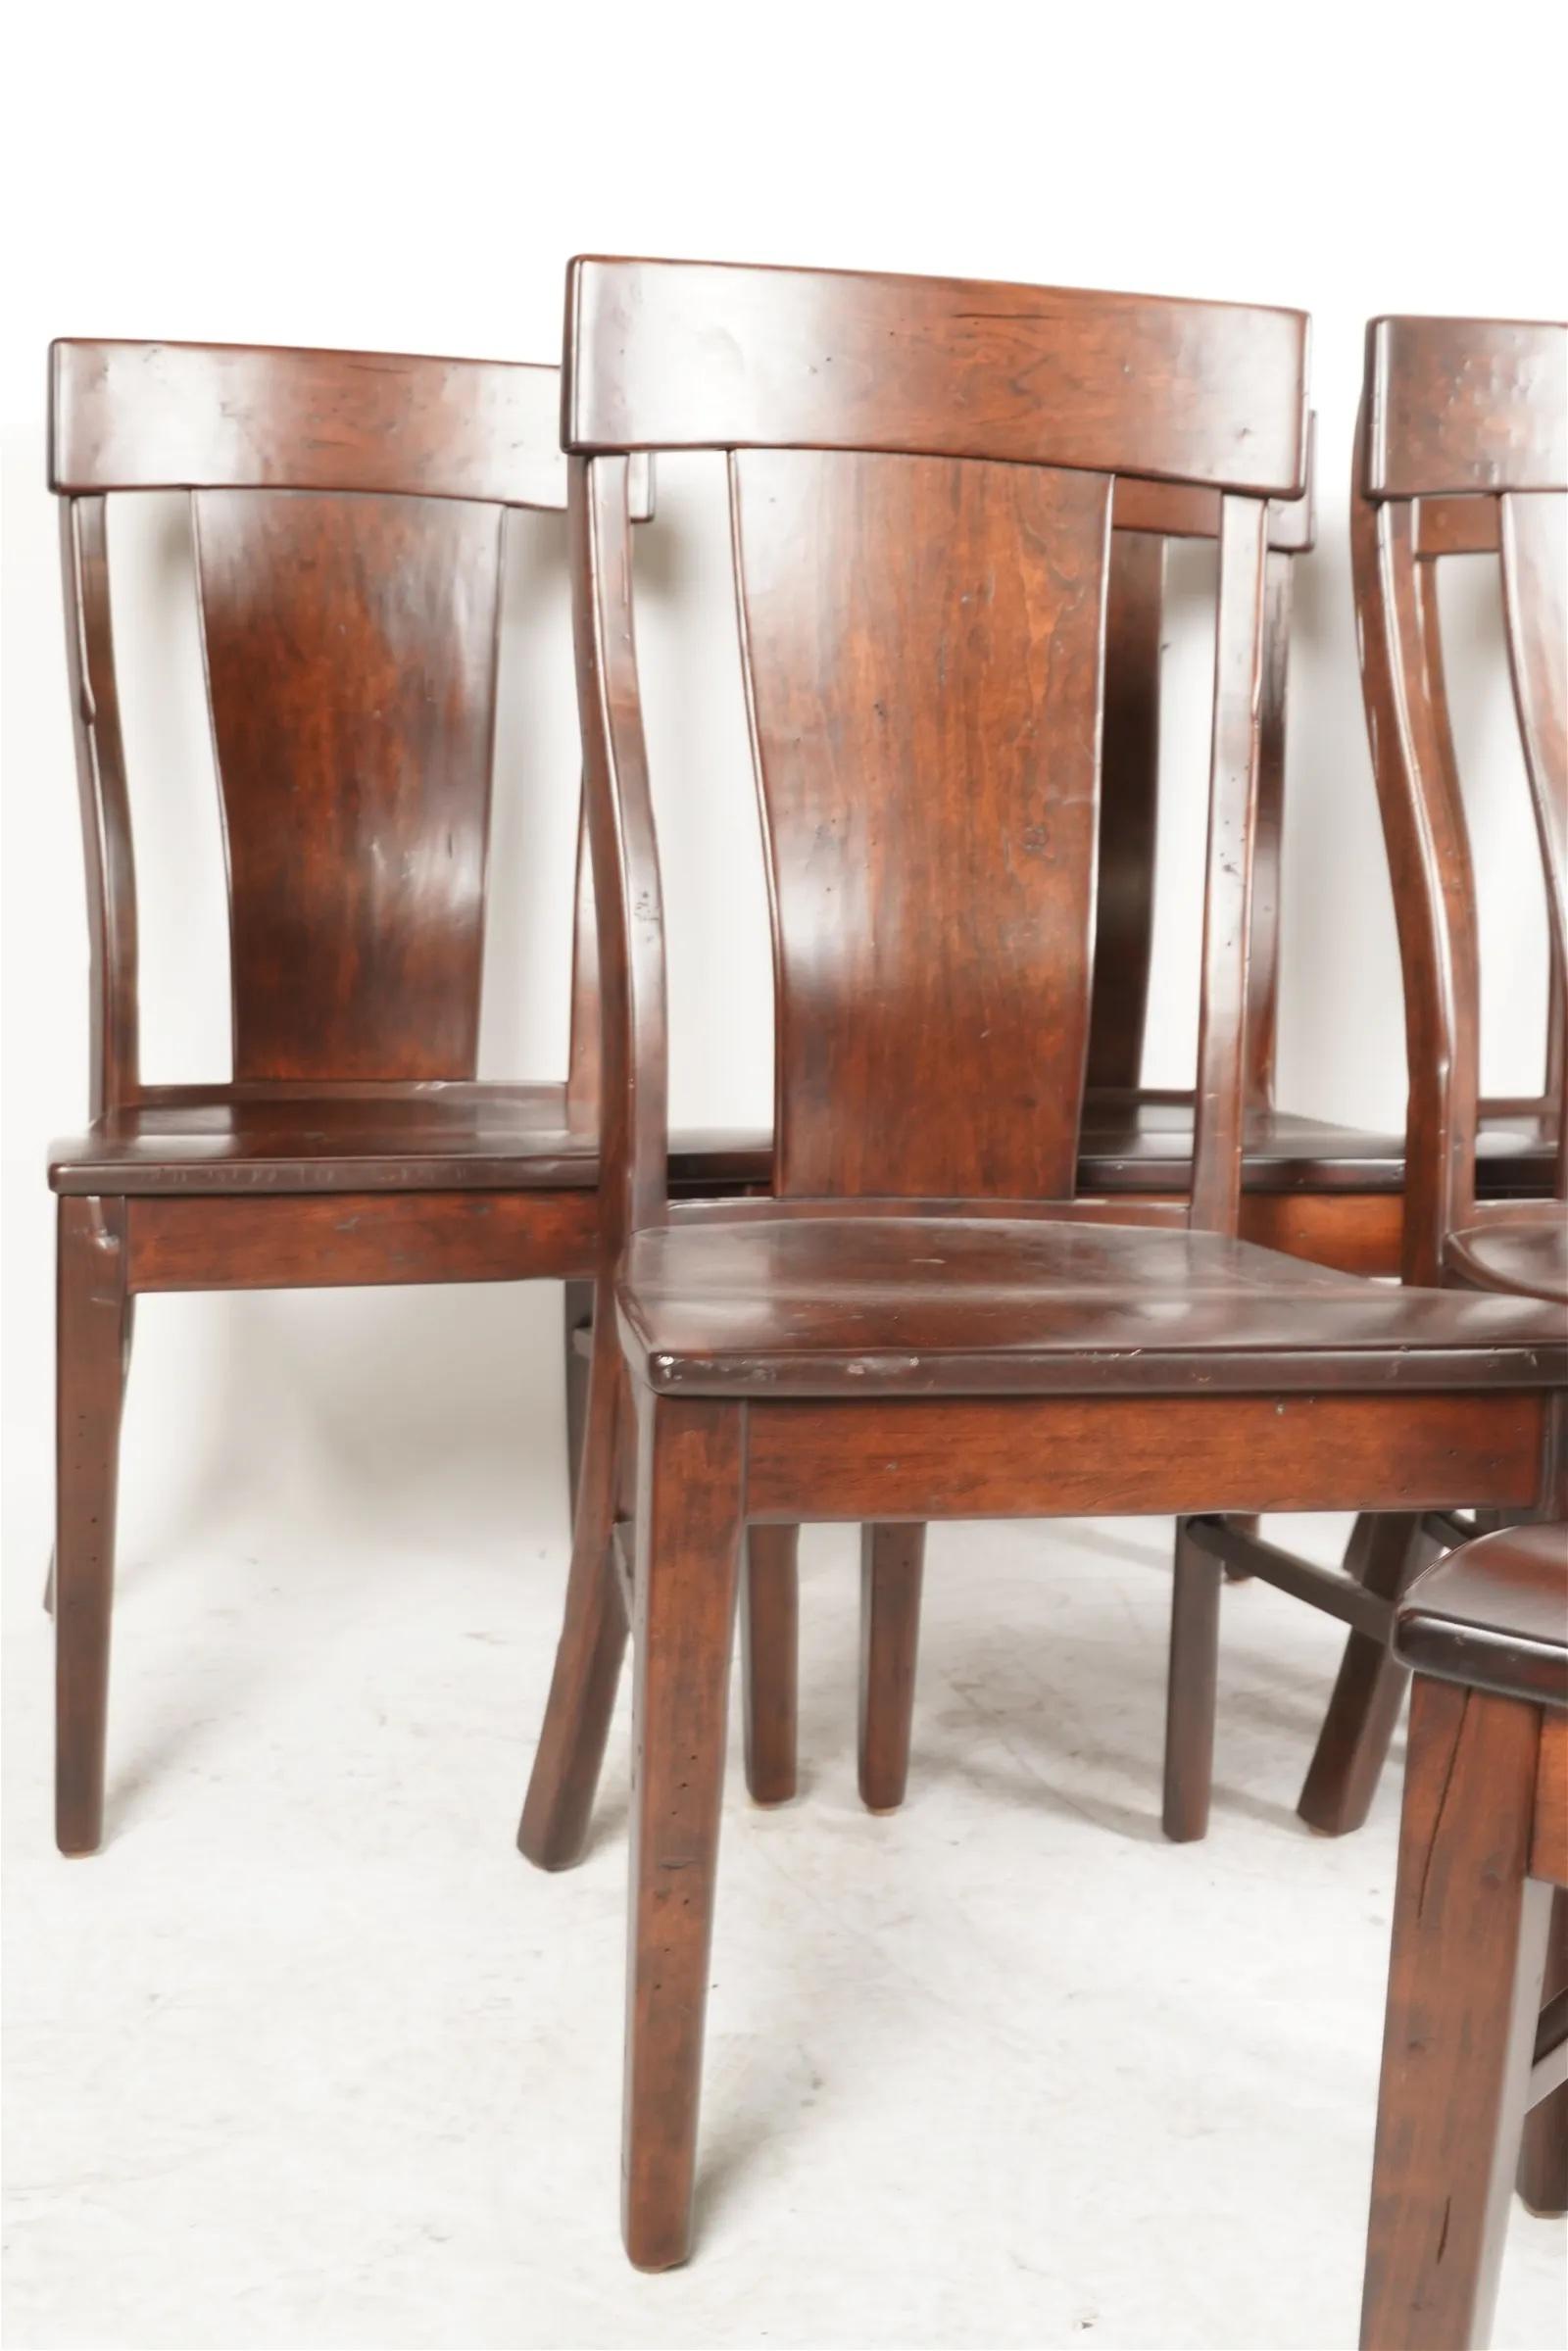 Hand-Crafted Set of 6 T Back Dining Chairs made by Simply Amish 